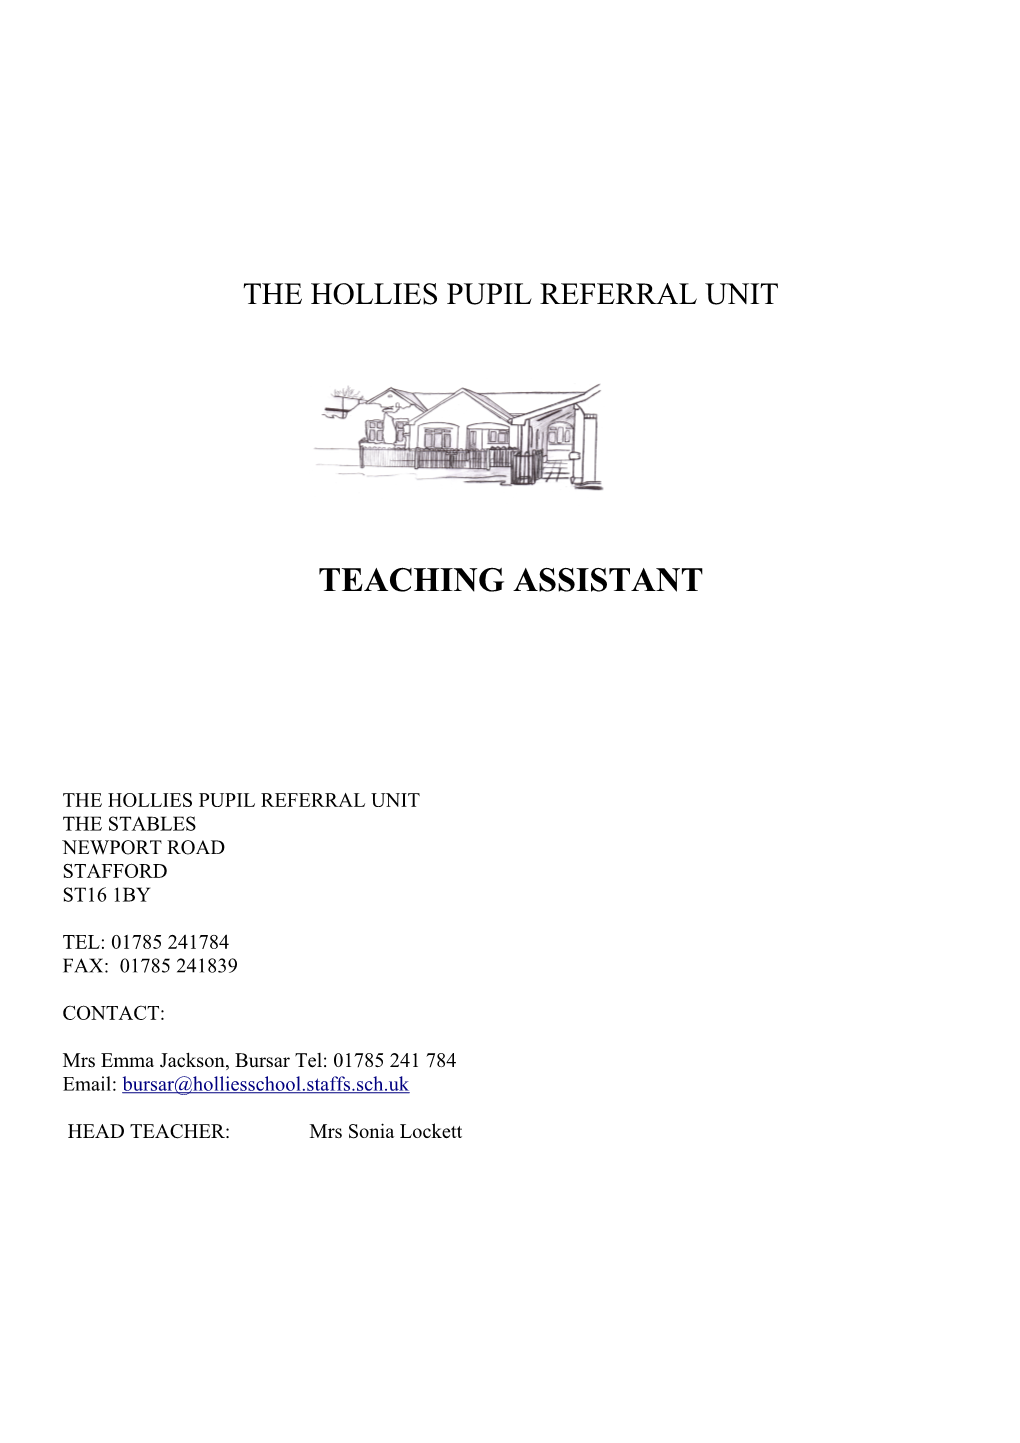 The Hollies Pupil Referral Unit